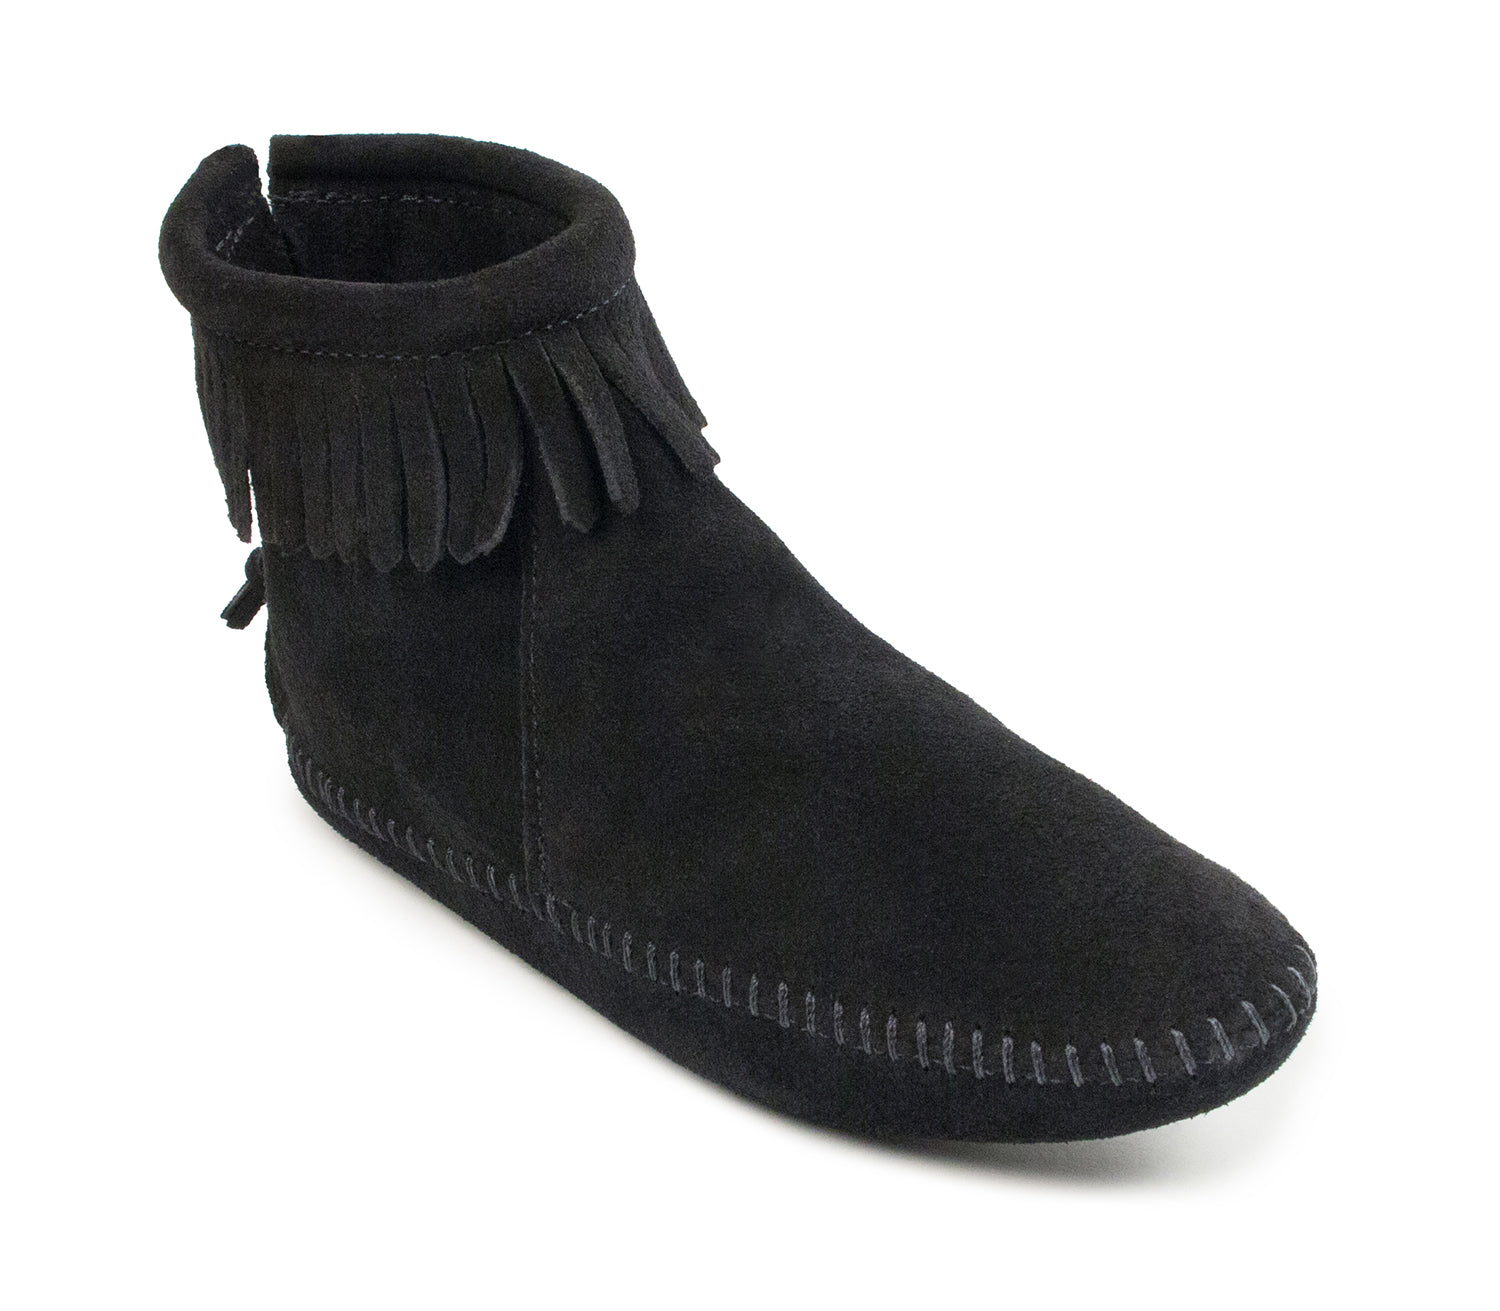 Back Zip Softsole Boot in Black from 3/4 Angle View